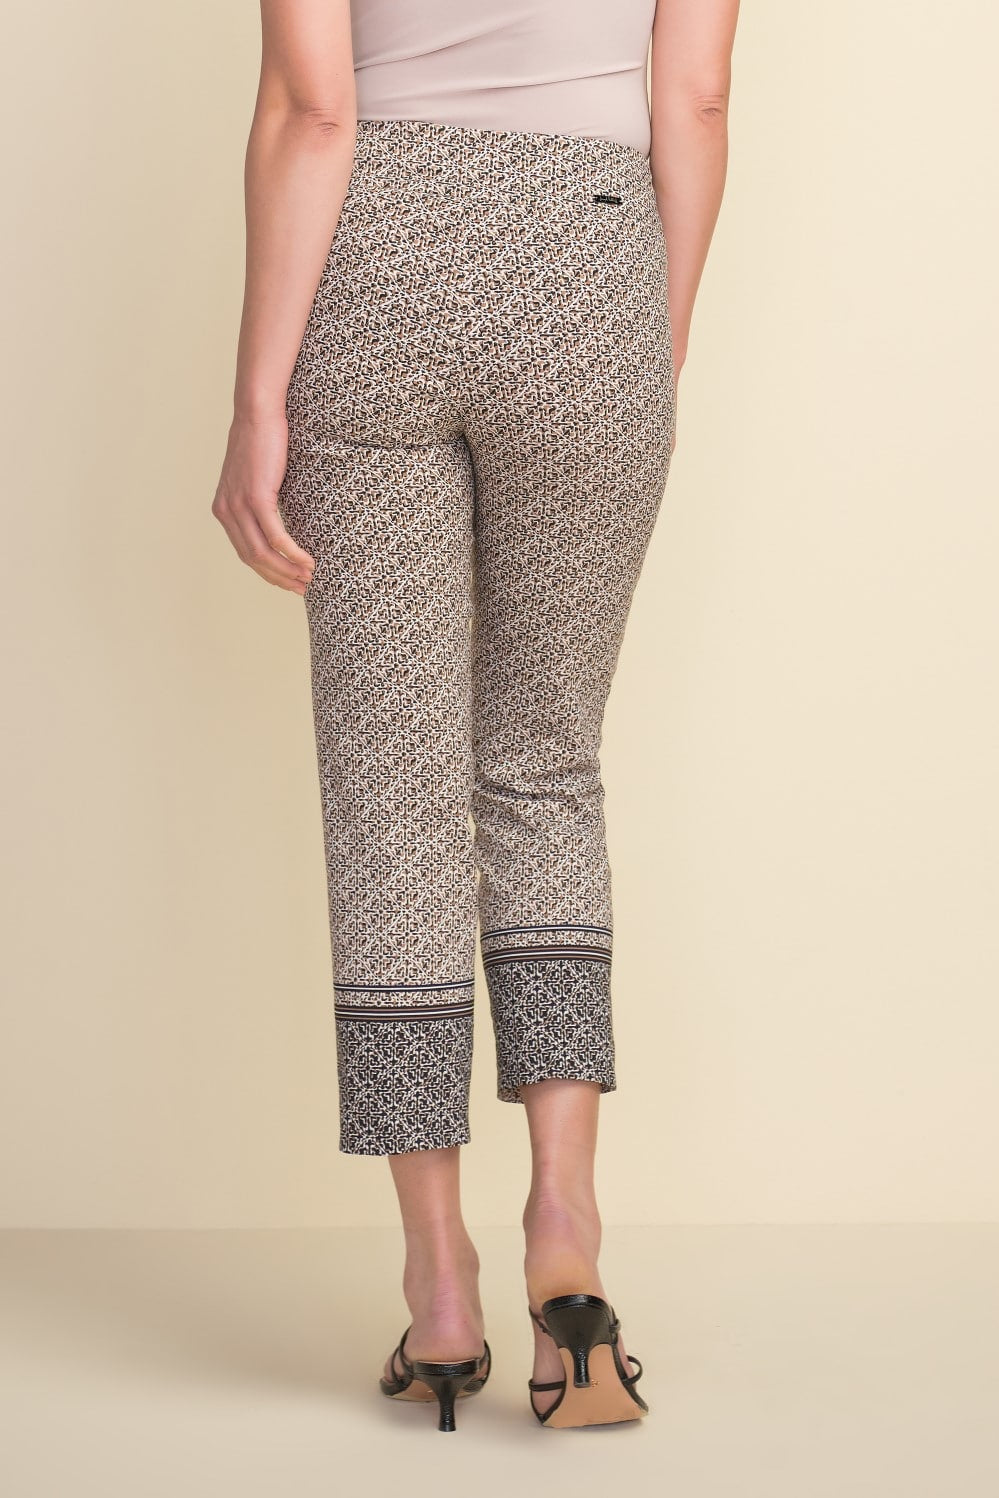 Joseph Ribkoff Pant 212167 Black/Taupe from BelleMiaBoutique.com 